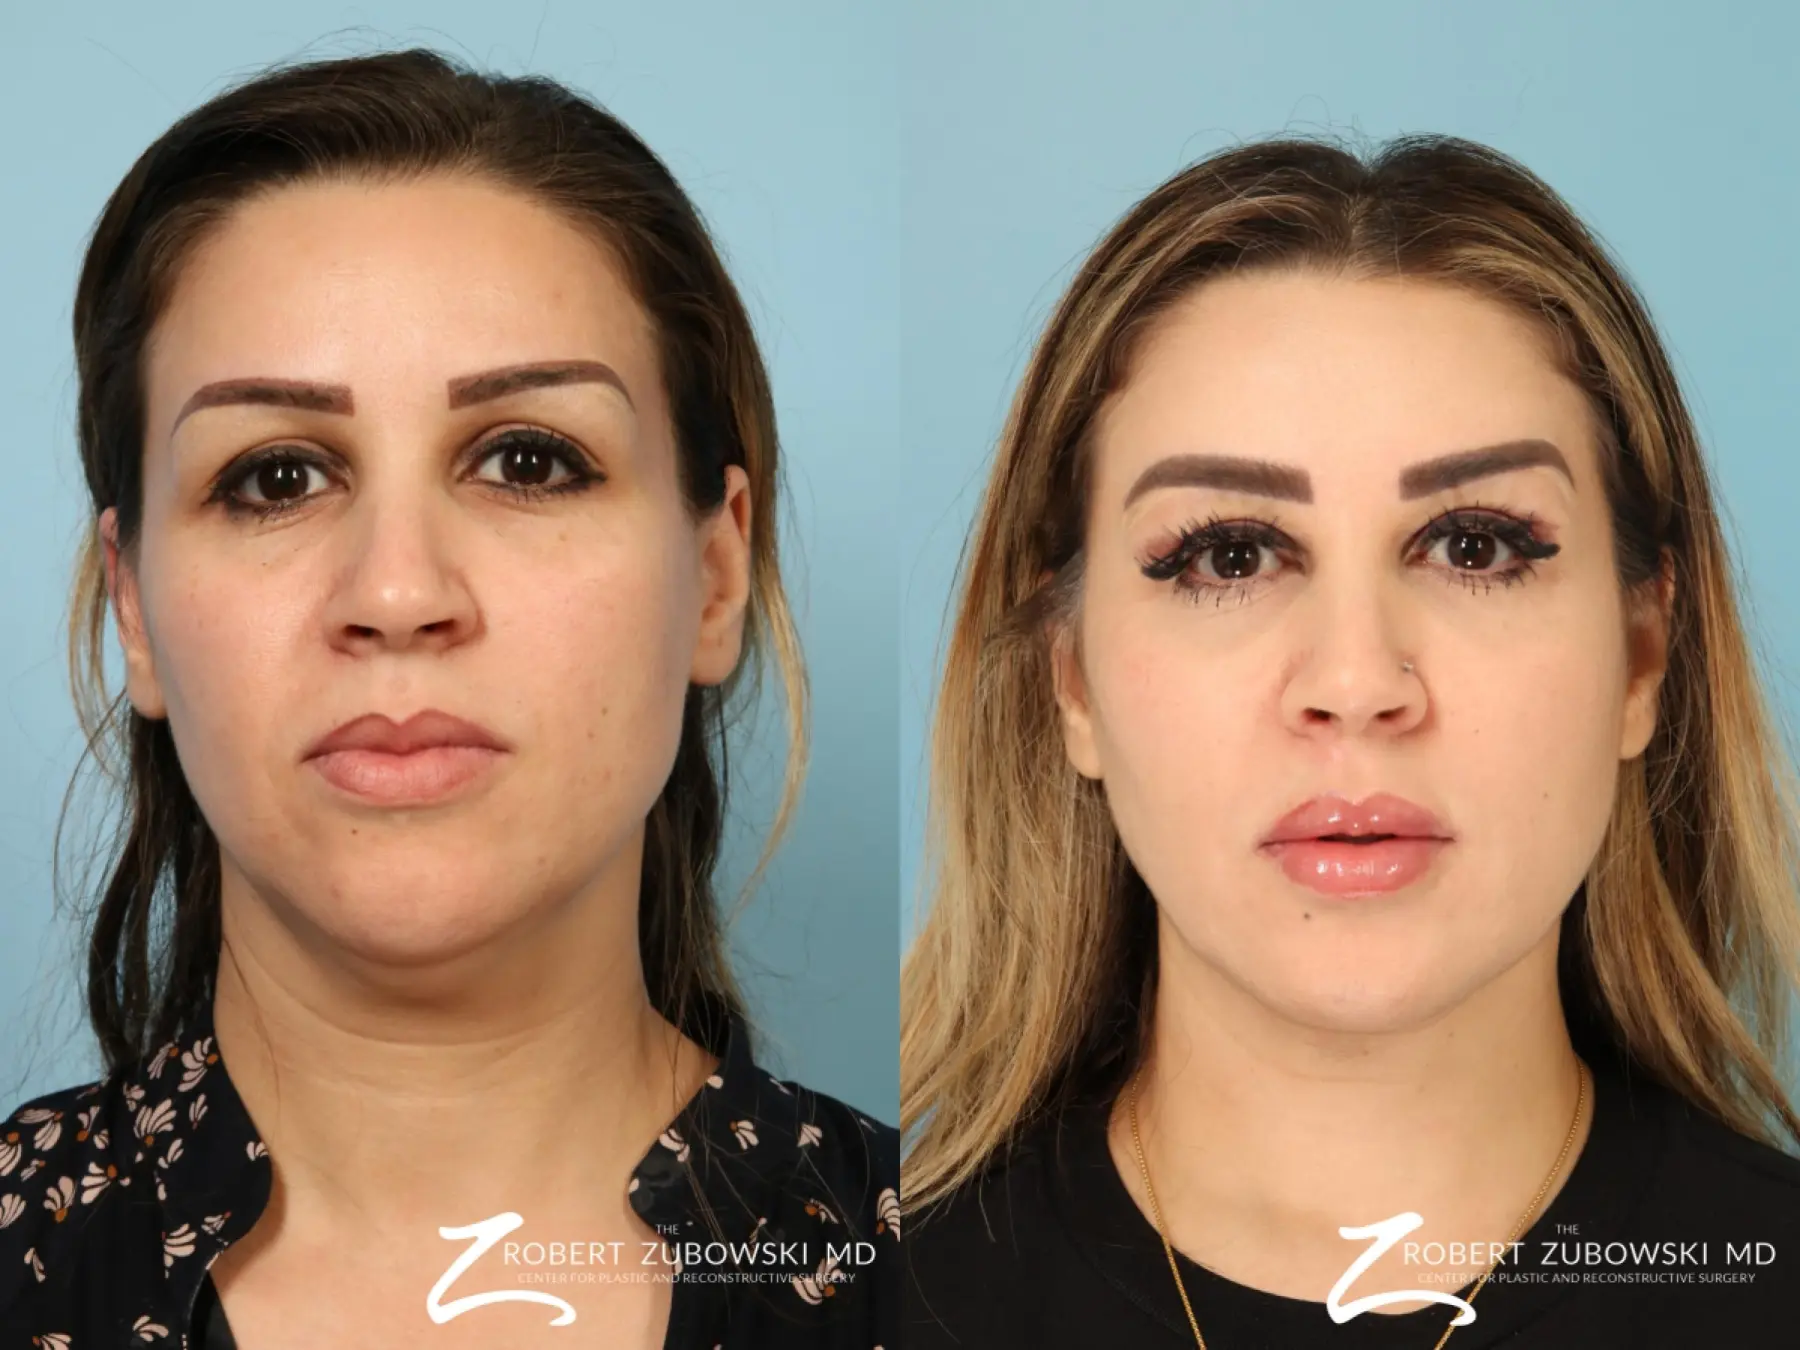 Liposuction Of The Neck: Patient 2 - Before and After 1